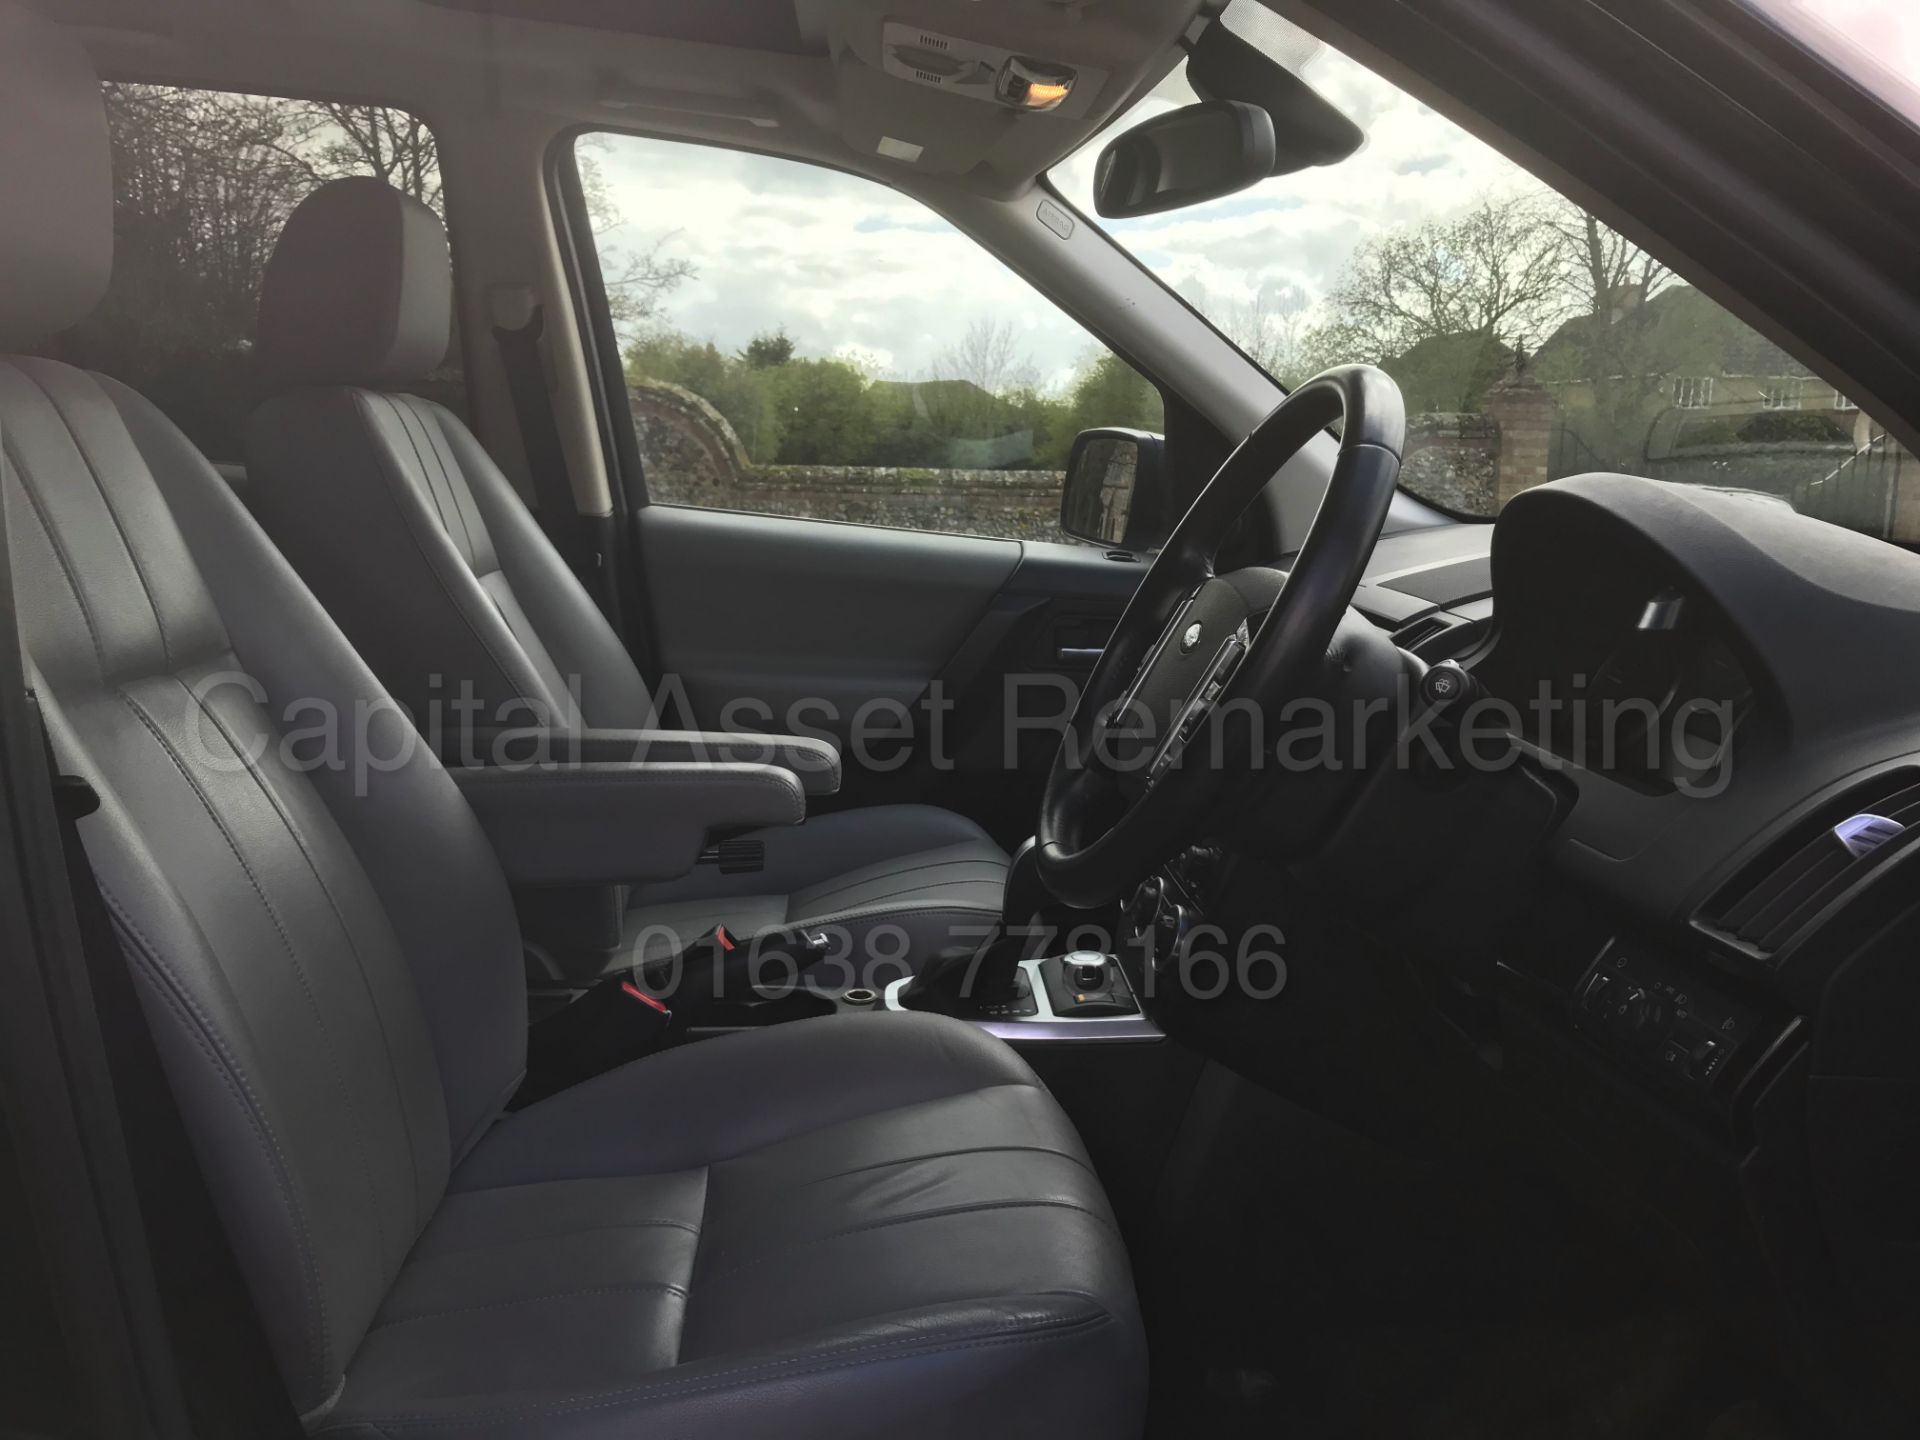 (On Sale) LAND ROVER FREELANDER 'HSE EDITION' (2011) '2.2 SD4 - AUTO' *SAT NAV - LEATHER - PAN ROOF* - Image 31 of 45